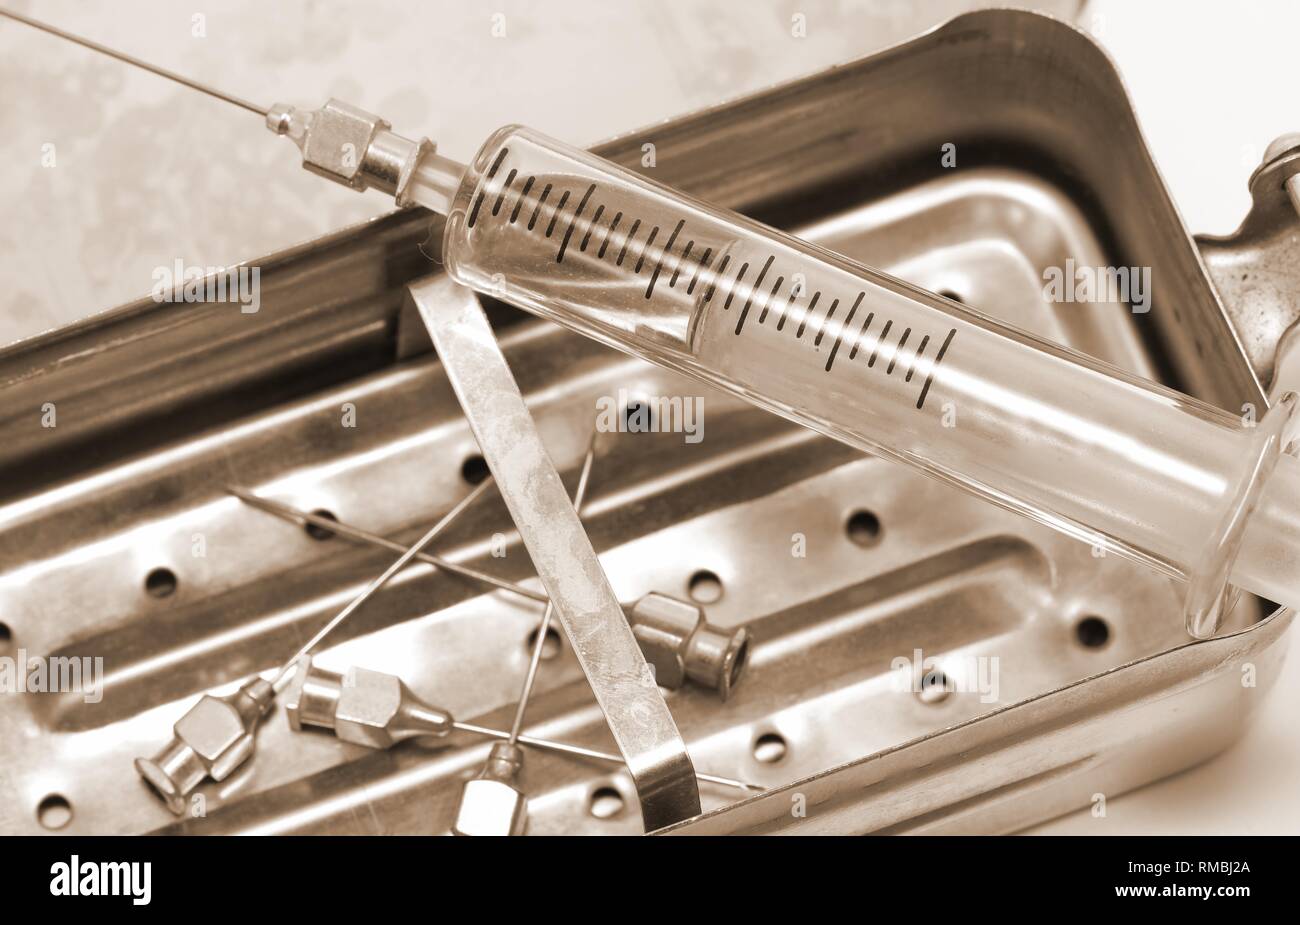 niddles and syringe in glass material with vintage old toned sepia effect Stock Photo